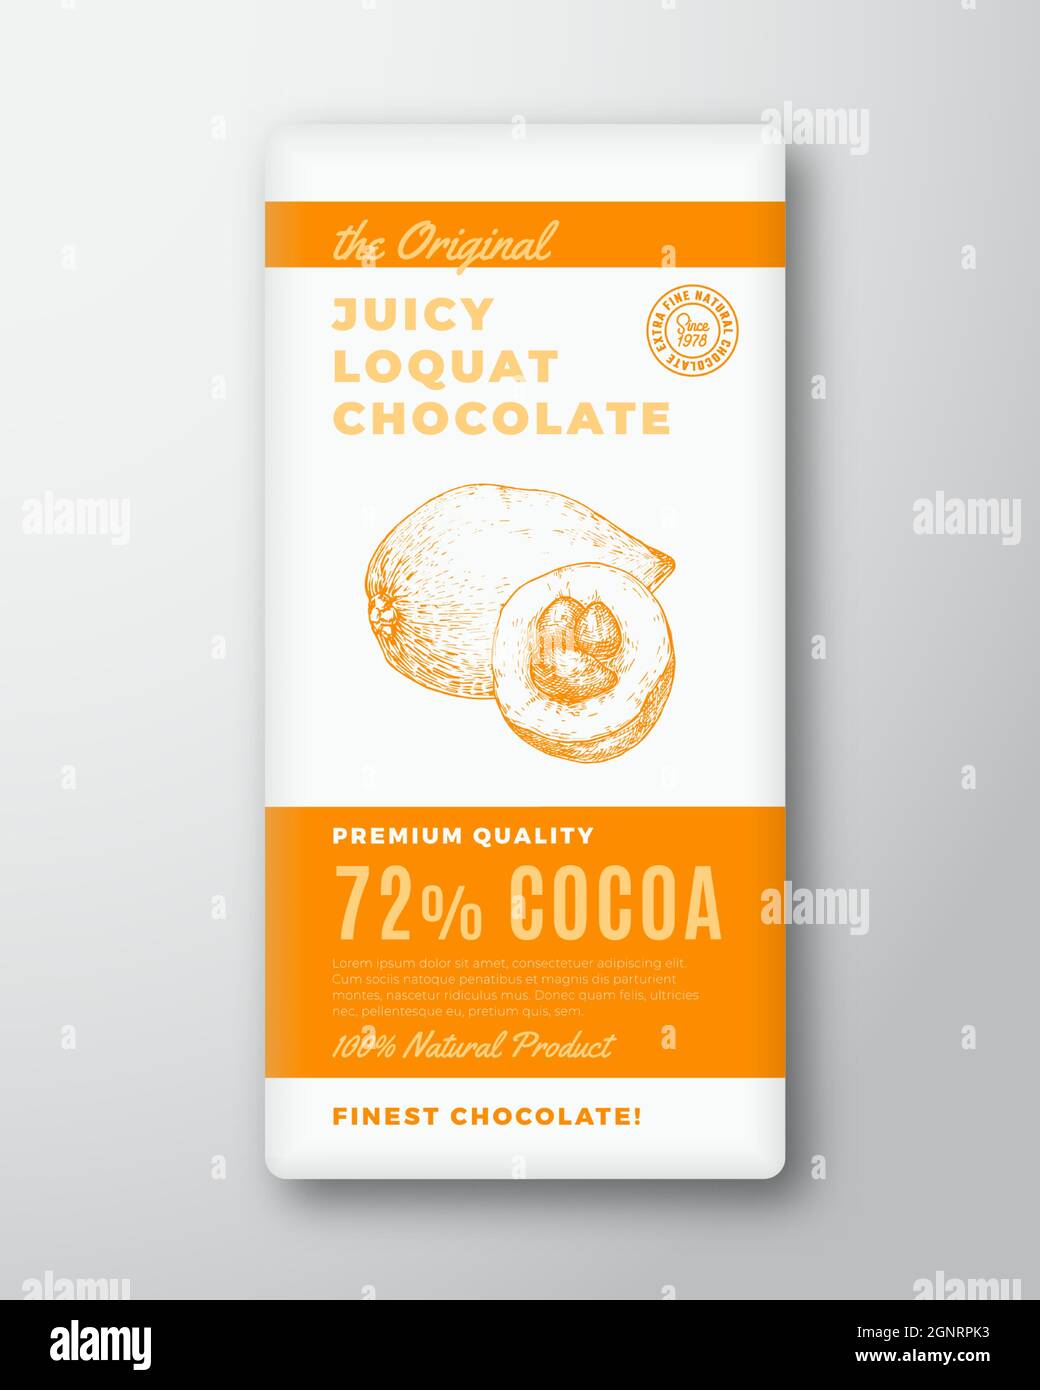 The Original Finest Chocolate Abstract Vector Packaging Design Label. Modern Typography and Hand Drawn Loquat Fruits Sketch Silhouette Background Stock Vector